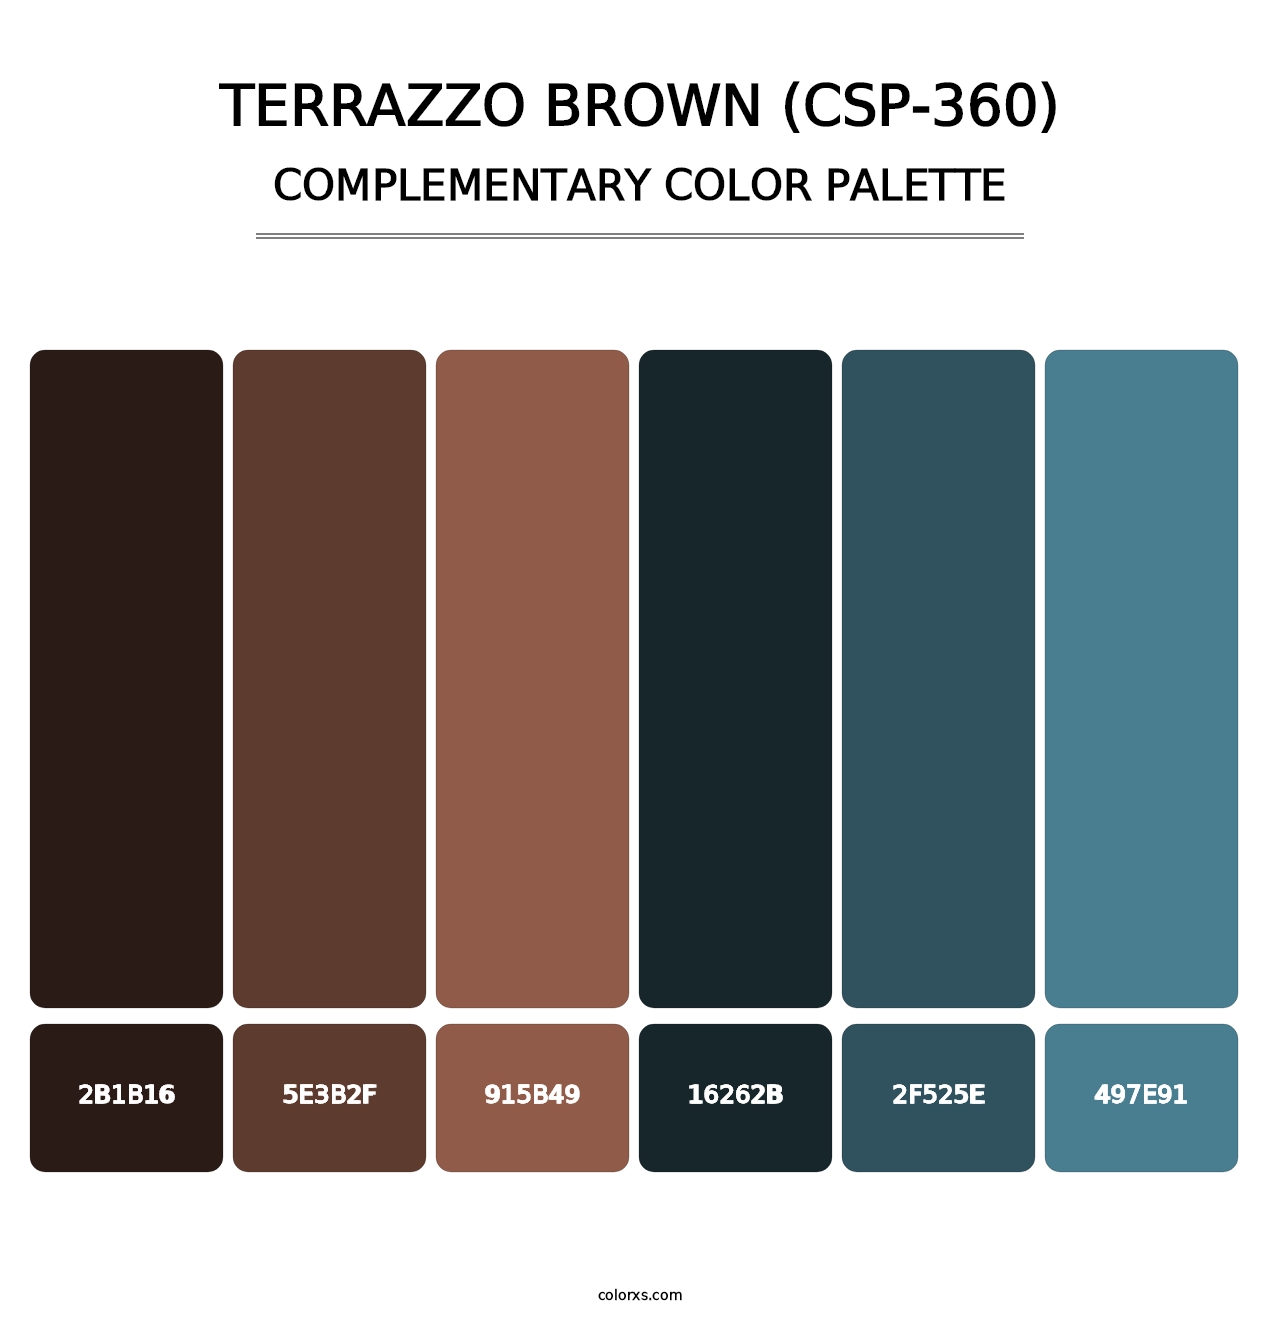 Terrazzo Brown (CSP-360) - Complementary Color Palette